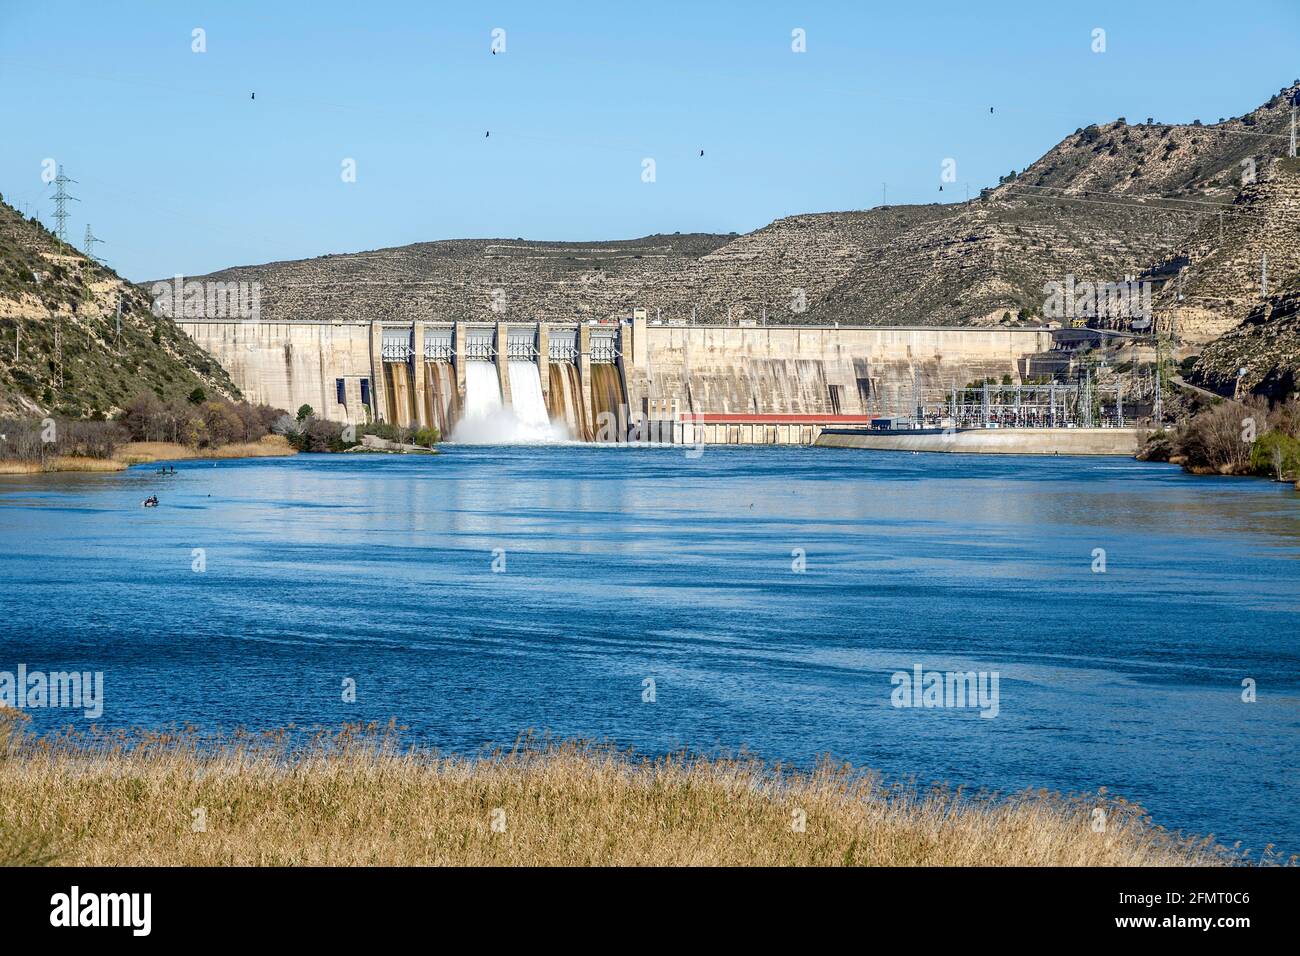 View of reservoir of Mequinenza. Aragon, Spain Stock Photo